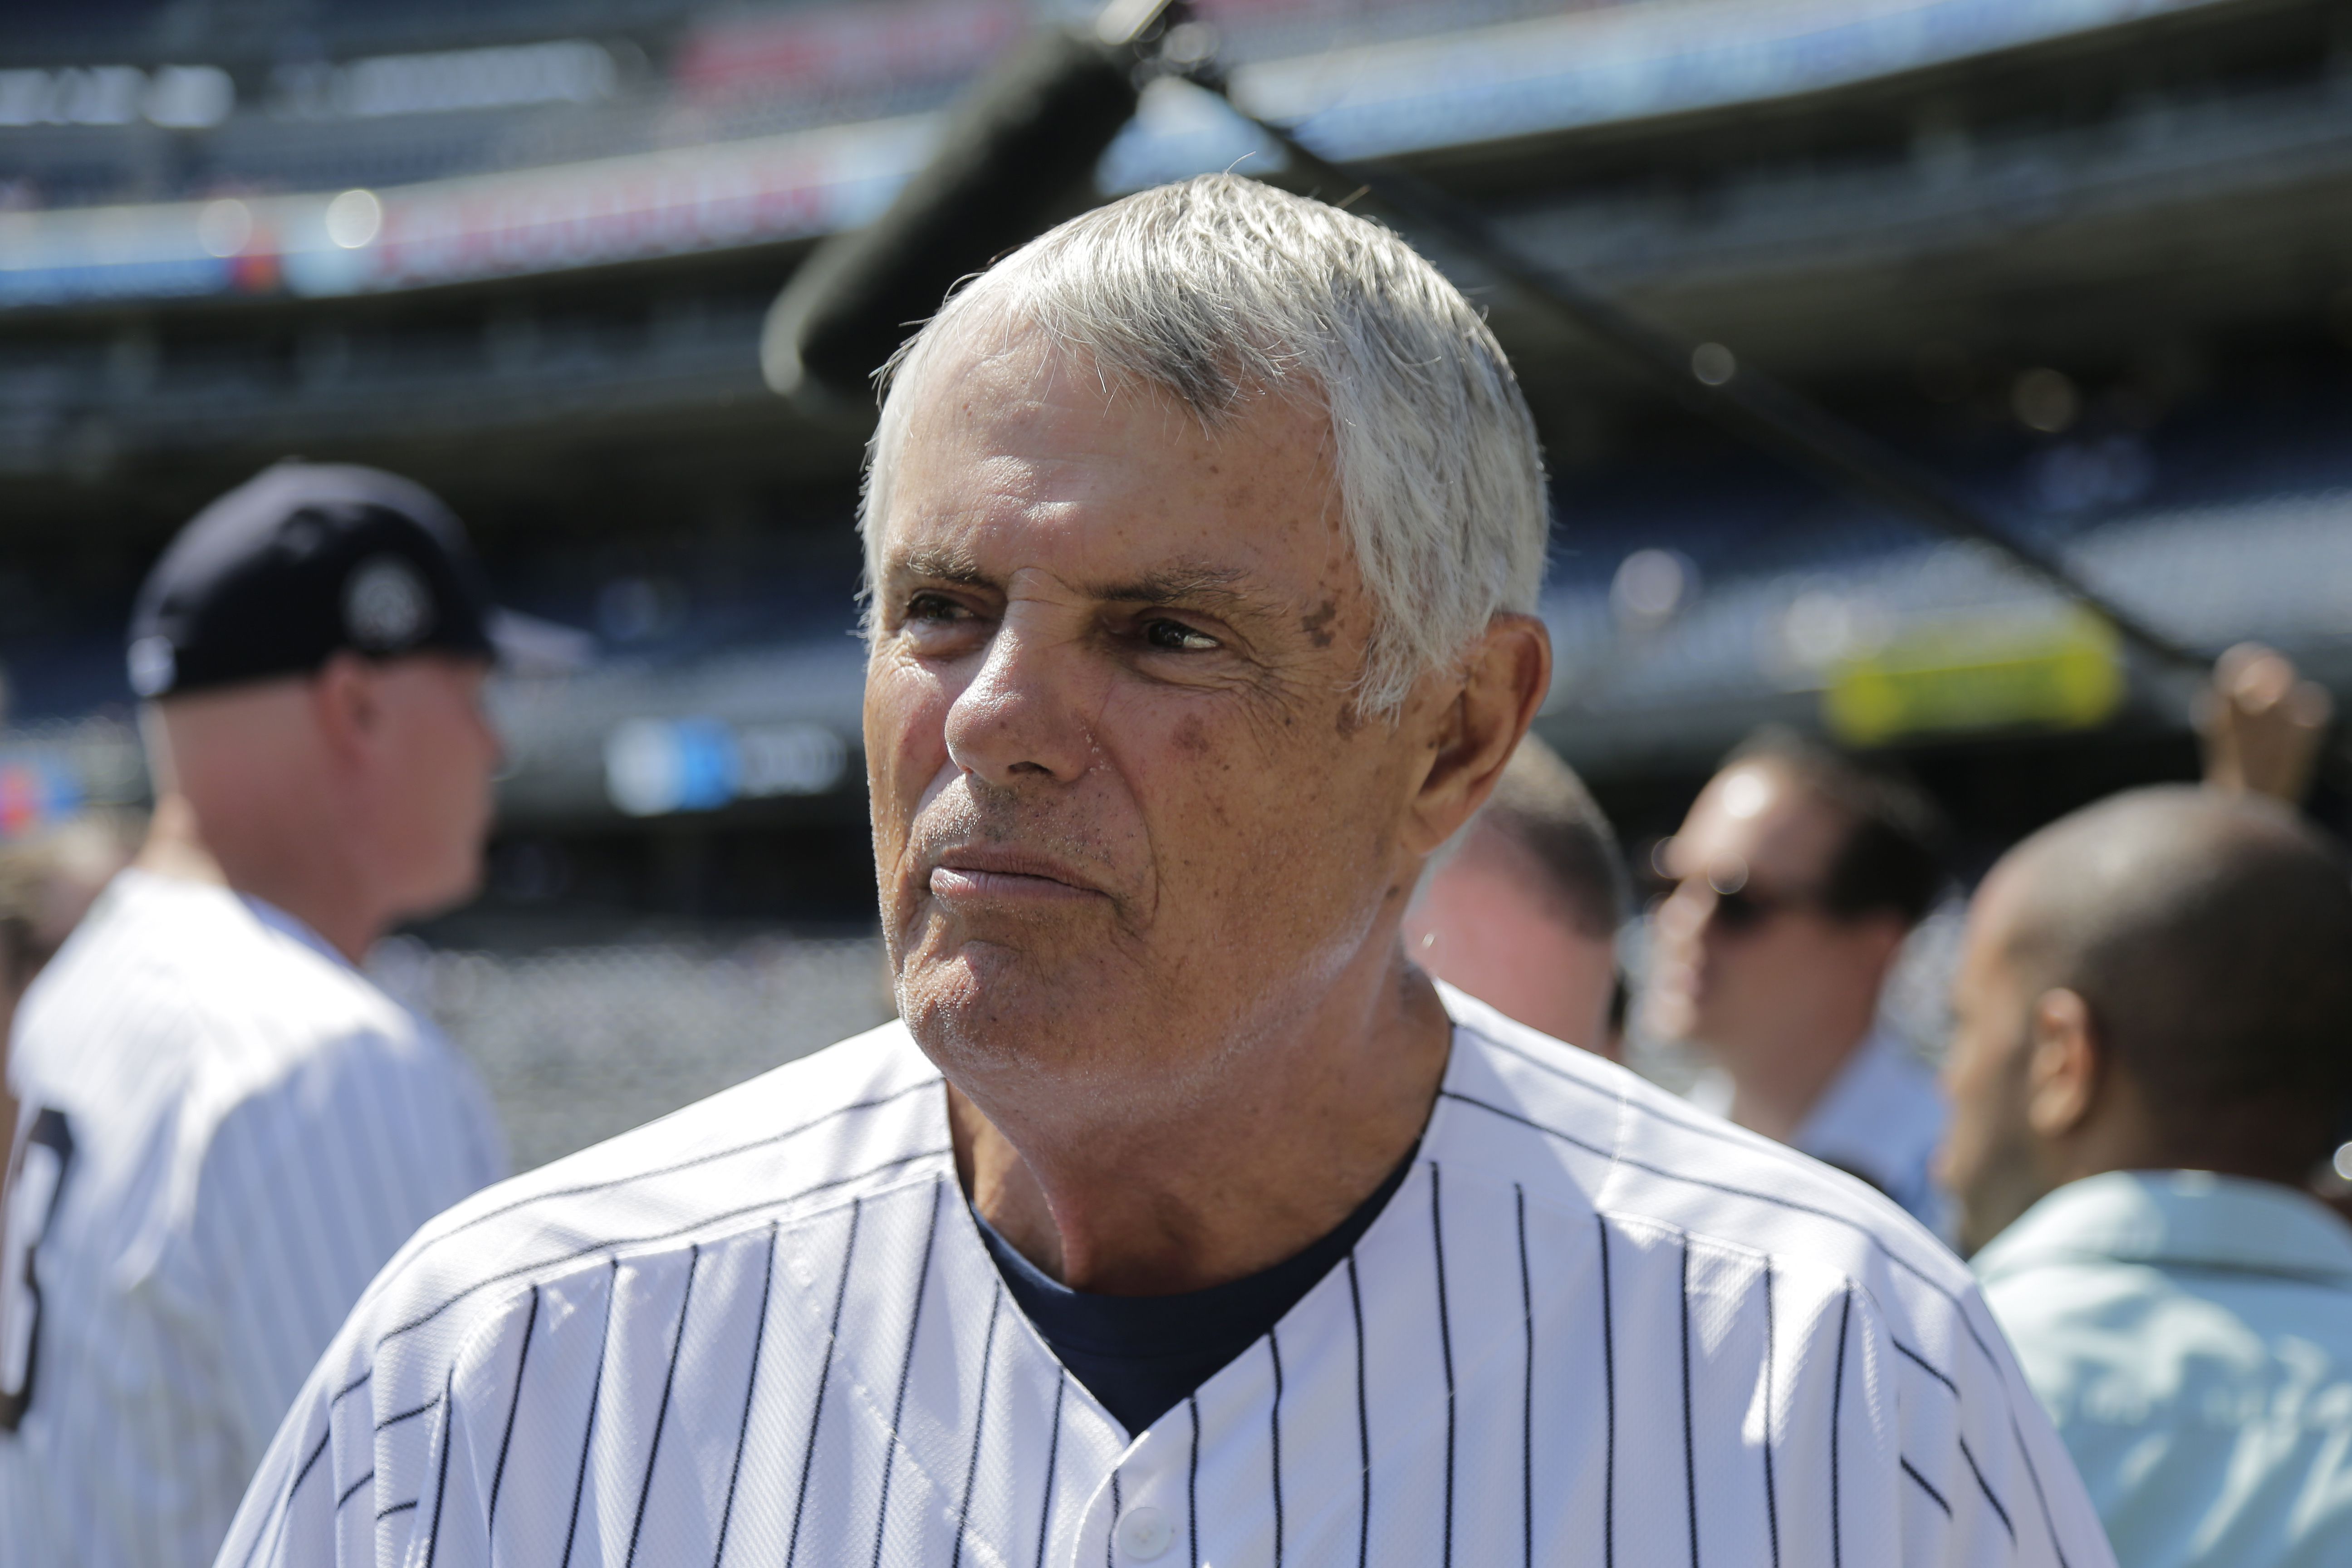 Former Reds manager Sweet Lou Piniella should receive his just due